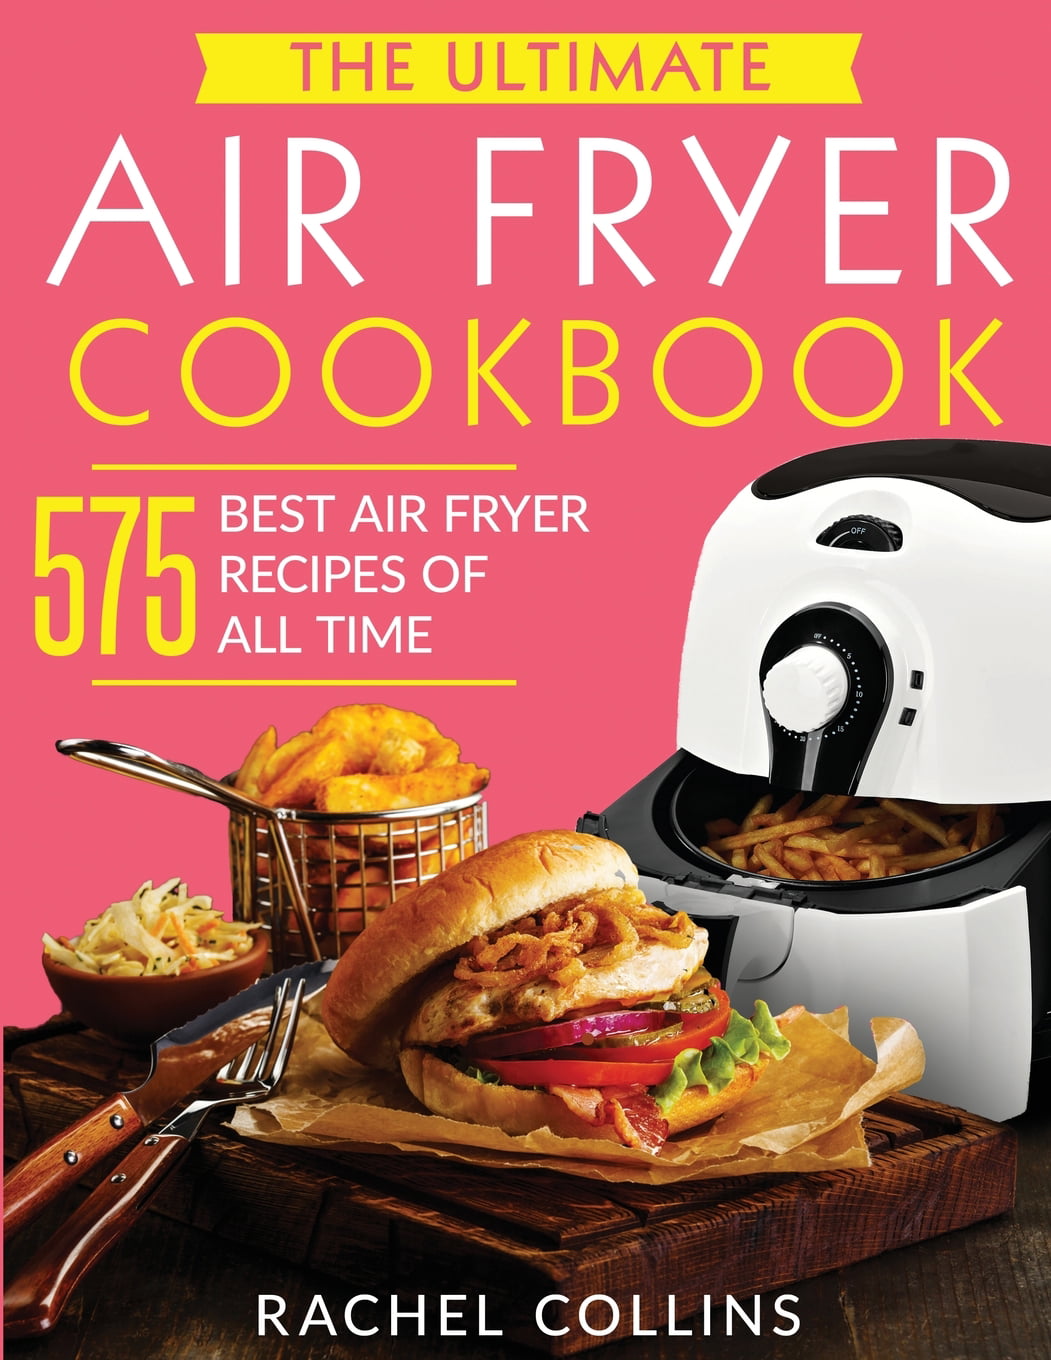 the-ultimate-air-fryer-cookbook-575-best-air-fryer-recipes-of-all